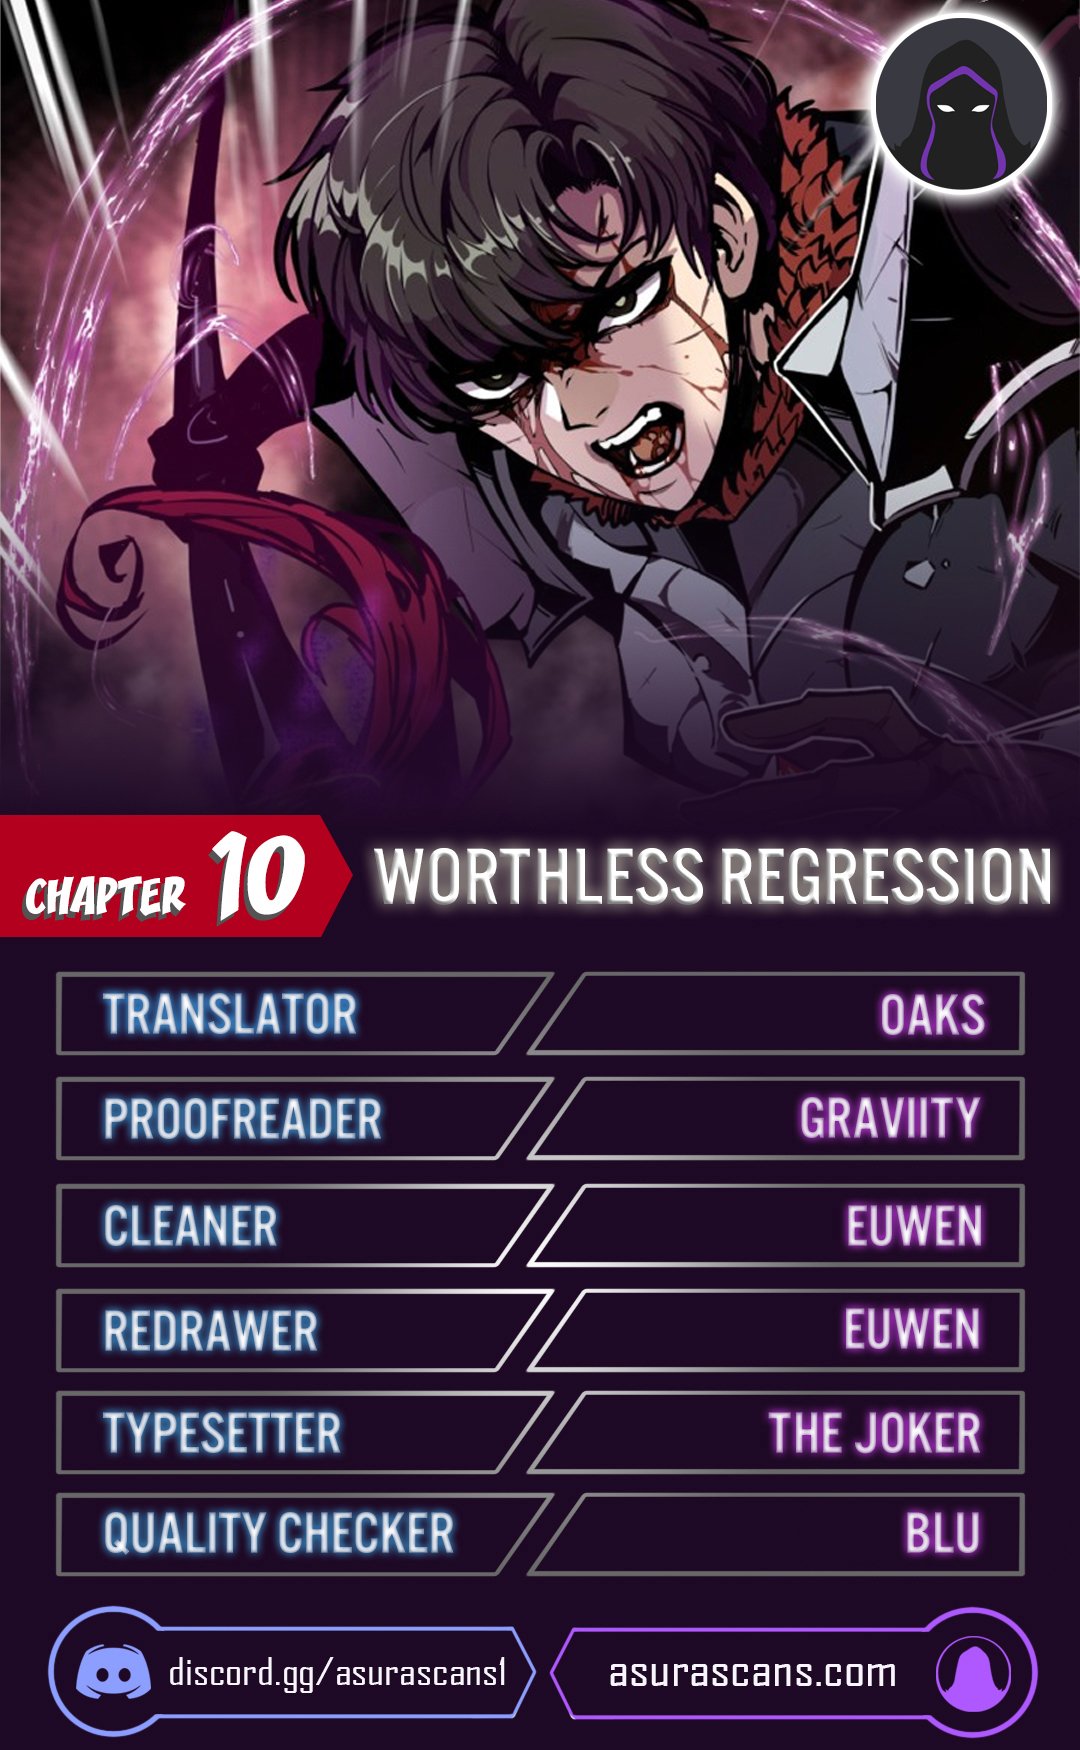 Worthless Regression - Chapter 20448 - Image 1